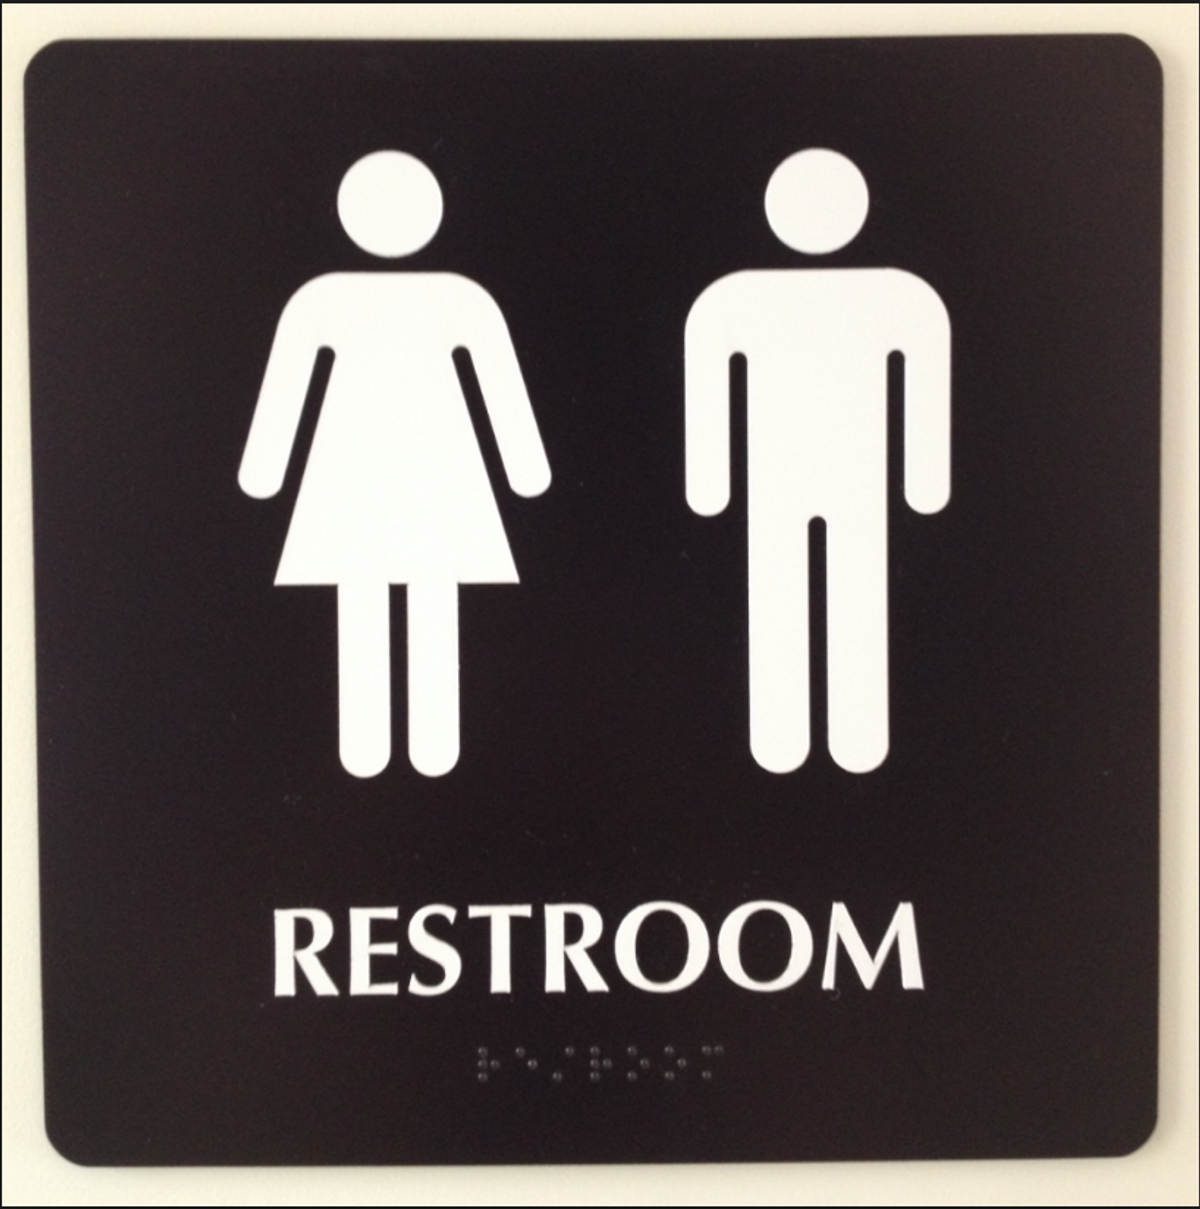 My Experience With A Gender-Neutral Bathroom